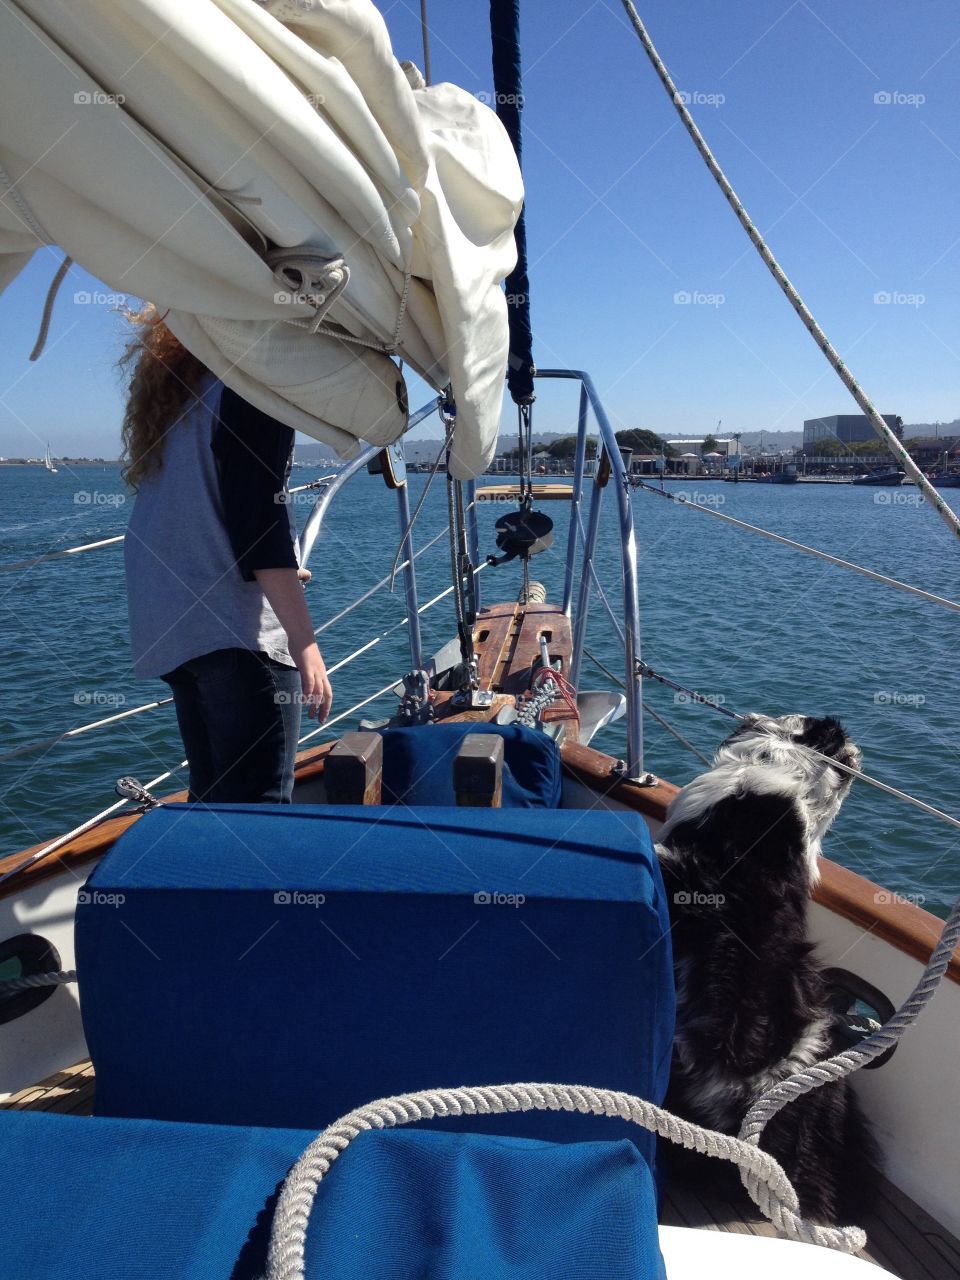 Dog and girl on boat 